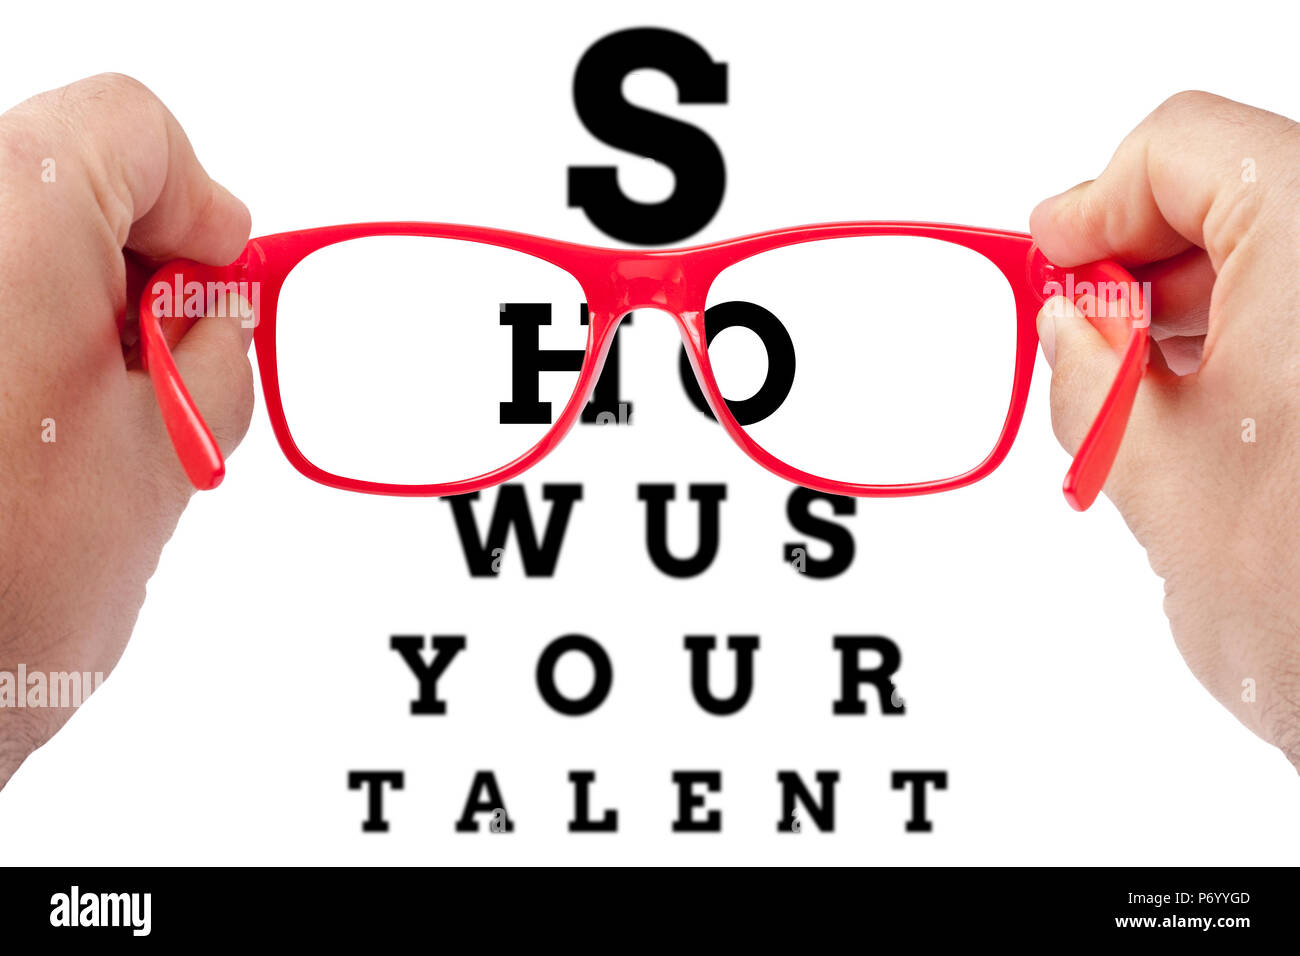 focusing on text Show us your talent arranged as eye chart test Stock Photo